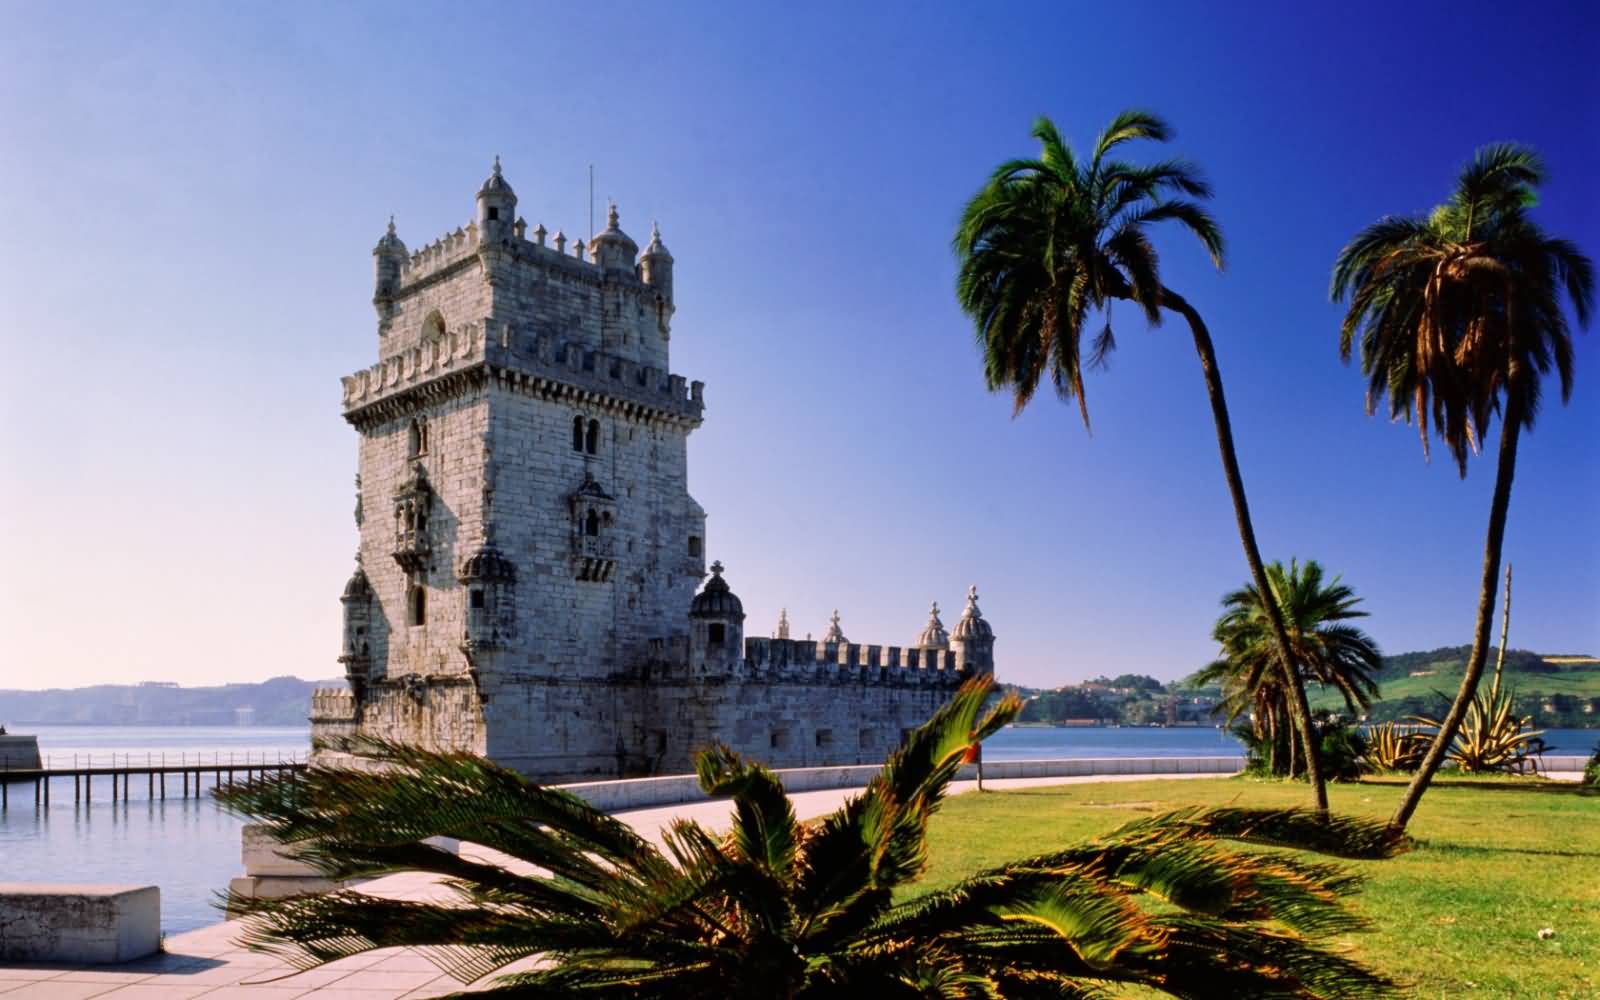 Belem Tower View From Garden In Lisbon, Portugal